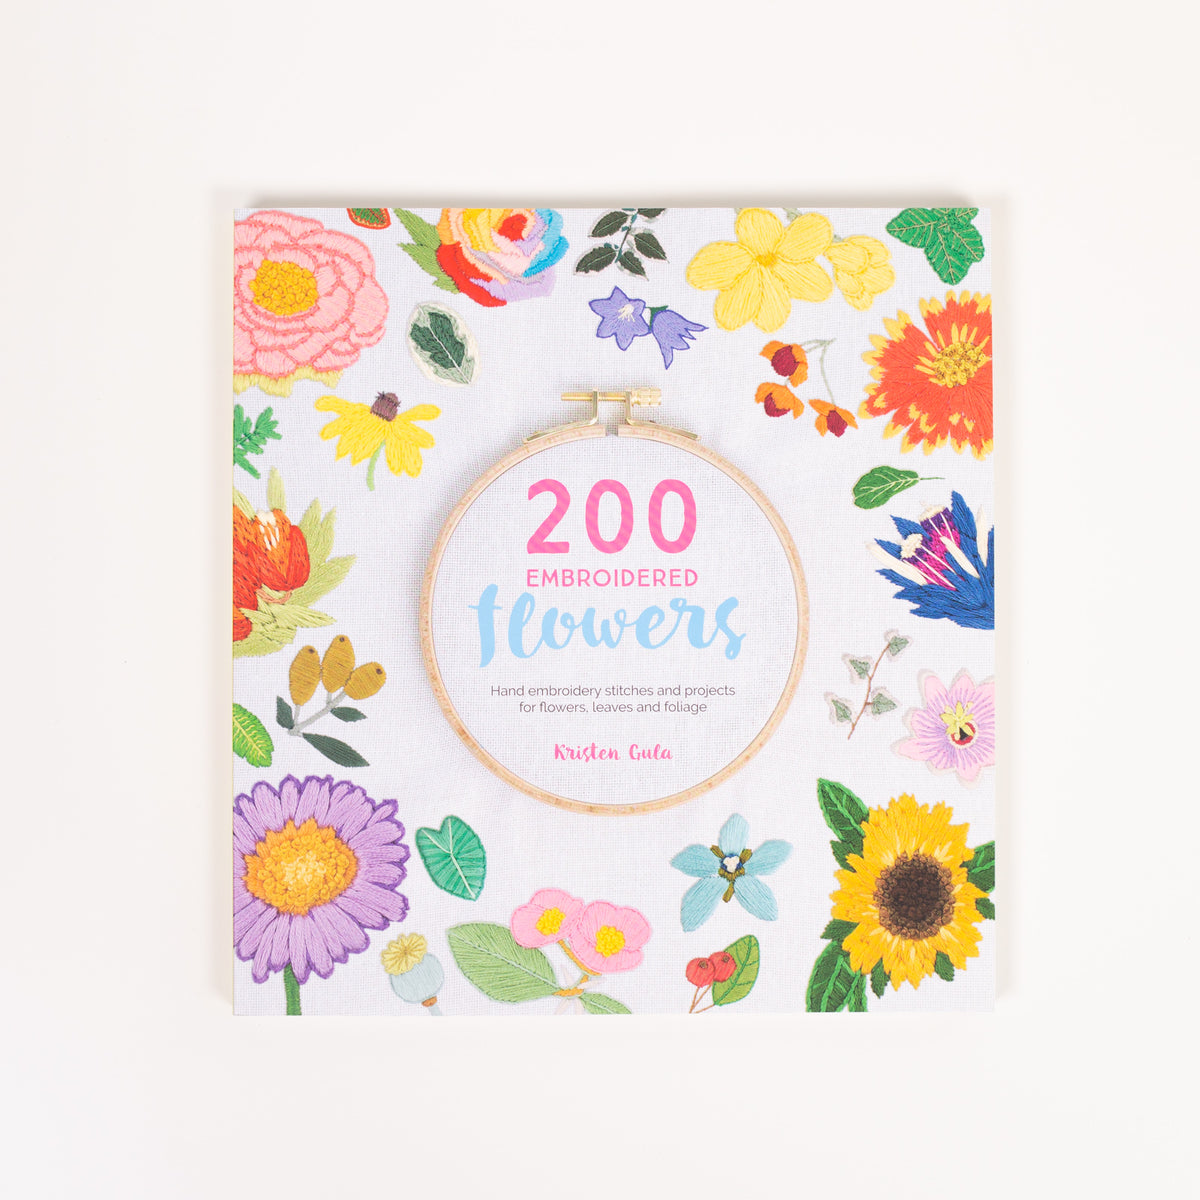 '200 Embroidered Flowers' by Kirsten Gula